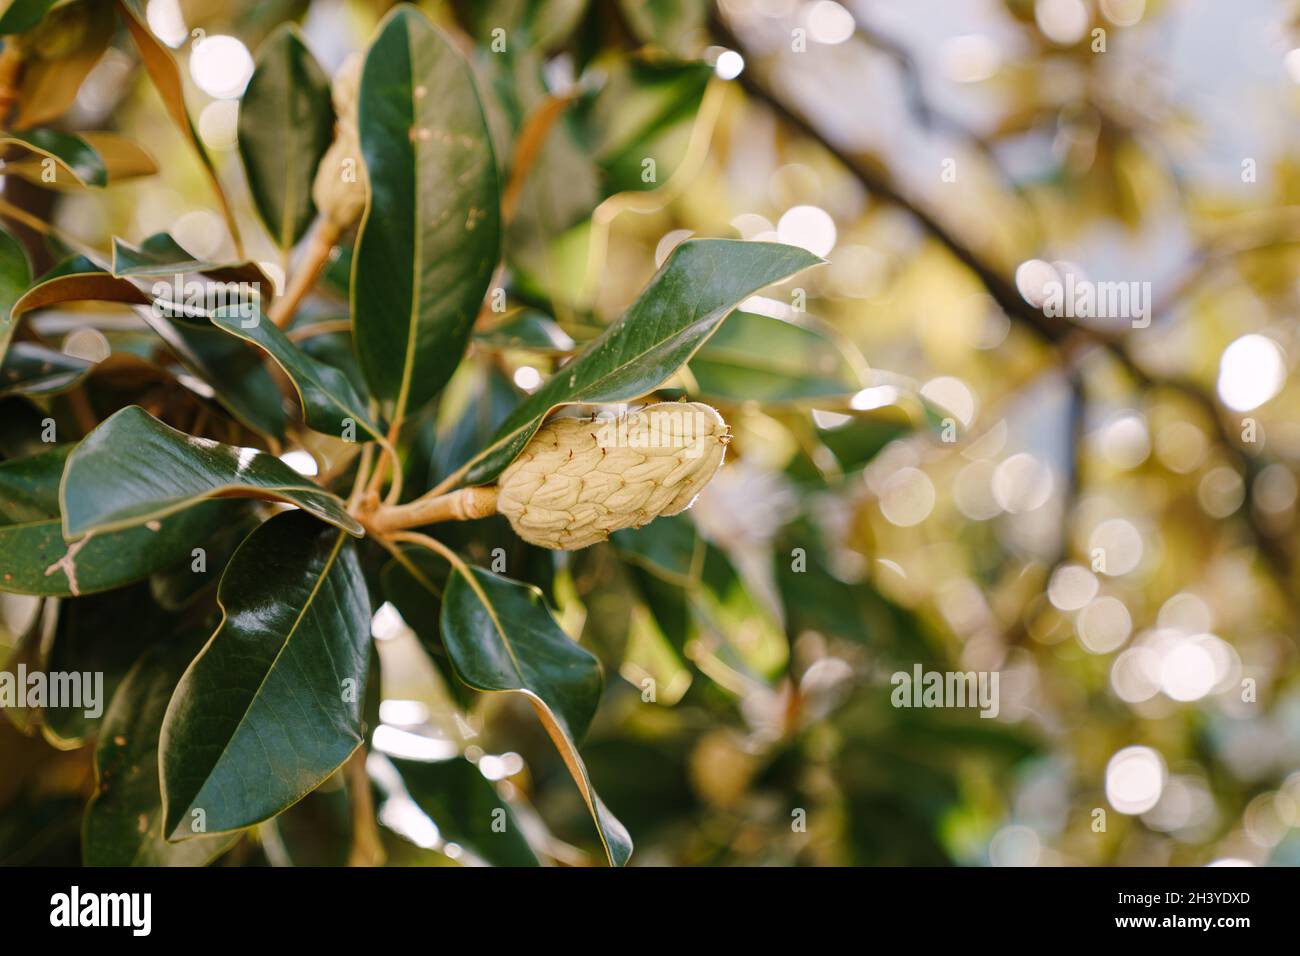 Close-up of the fruit of the pine cone magnolia leaflet on the branches in the green leaves. Stock Photo